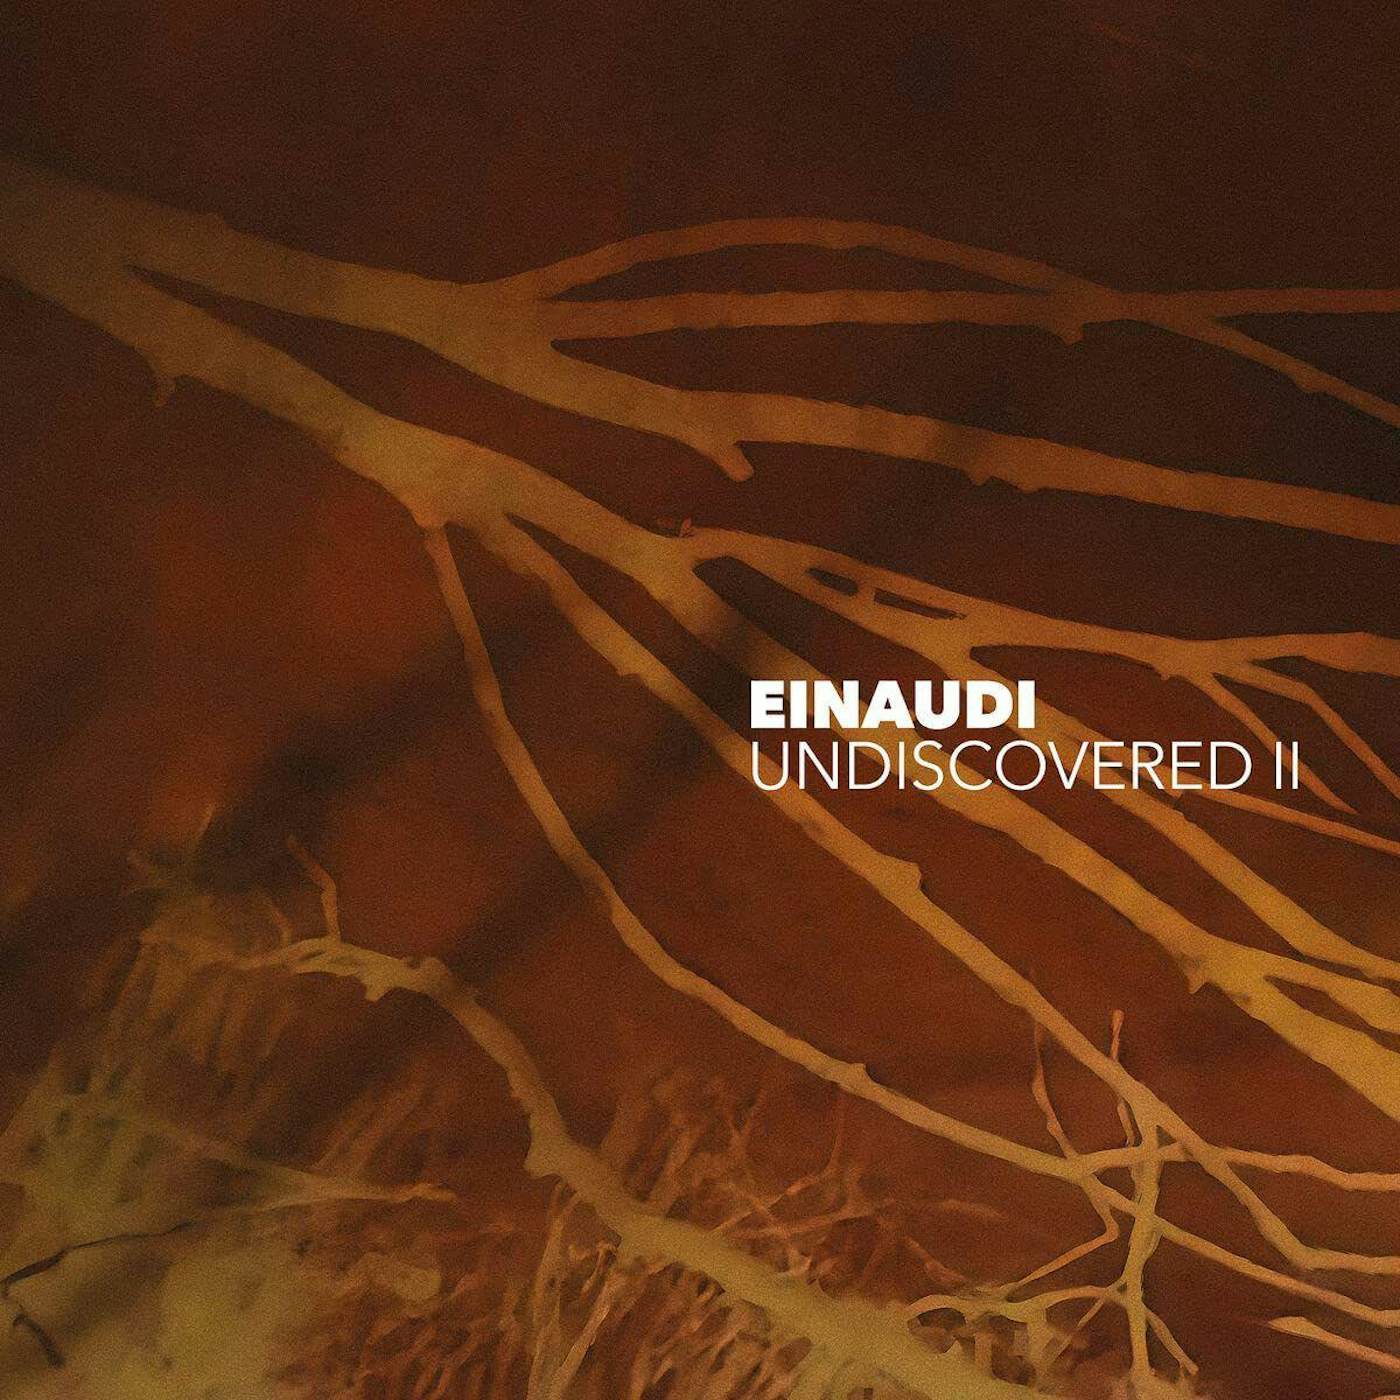 Ludovico Einaudi has released a new piano album, '12 Songs From